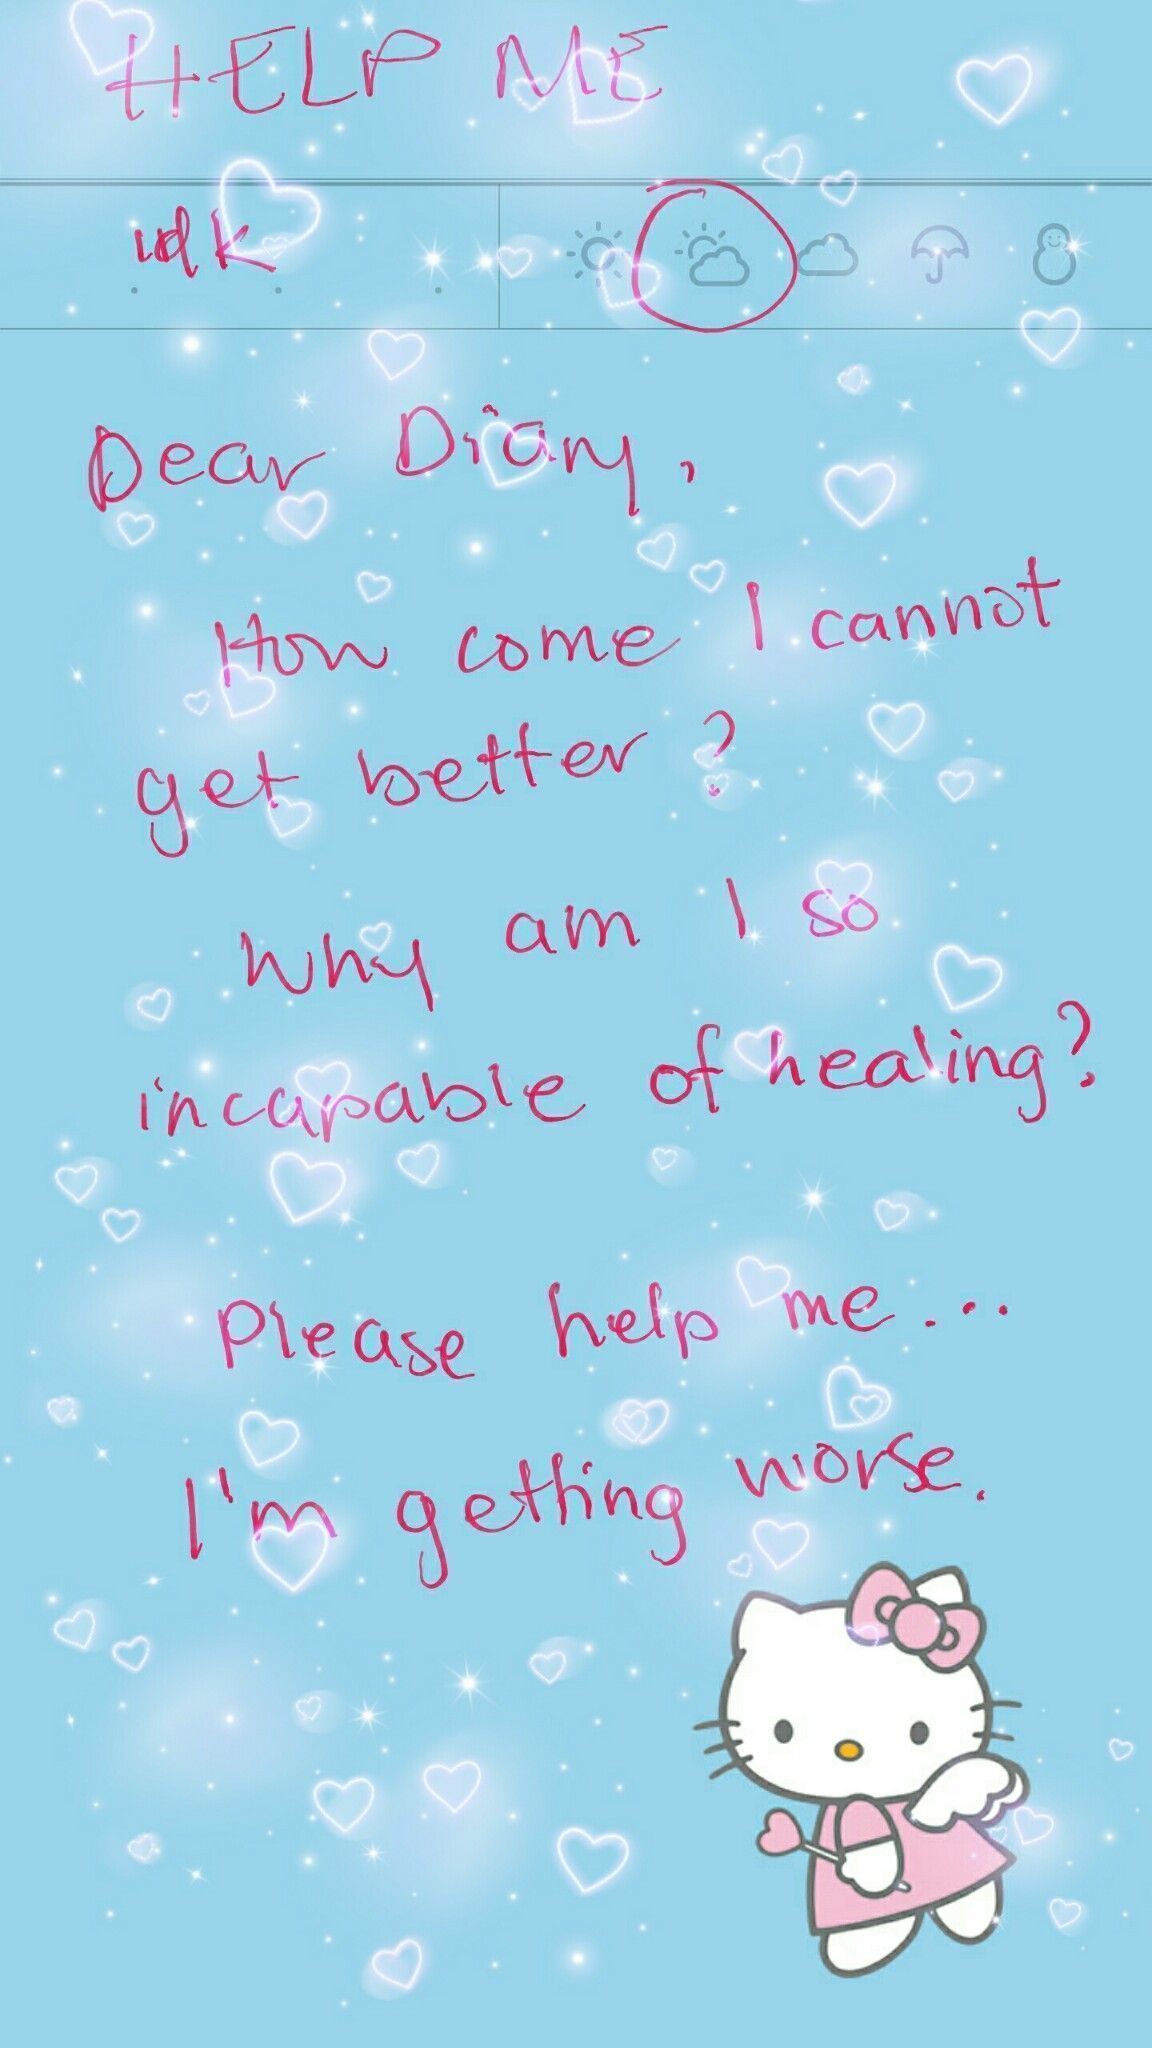 A letter from Hello Kitty to Diony asking for help. - Traumacore